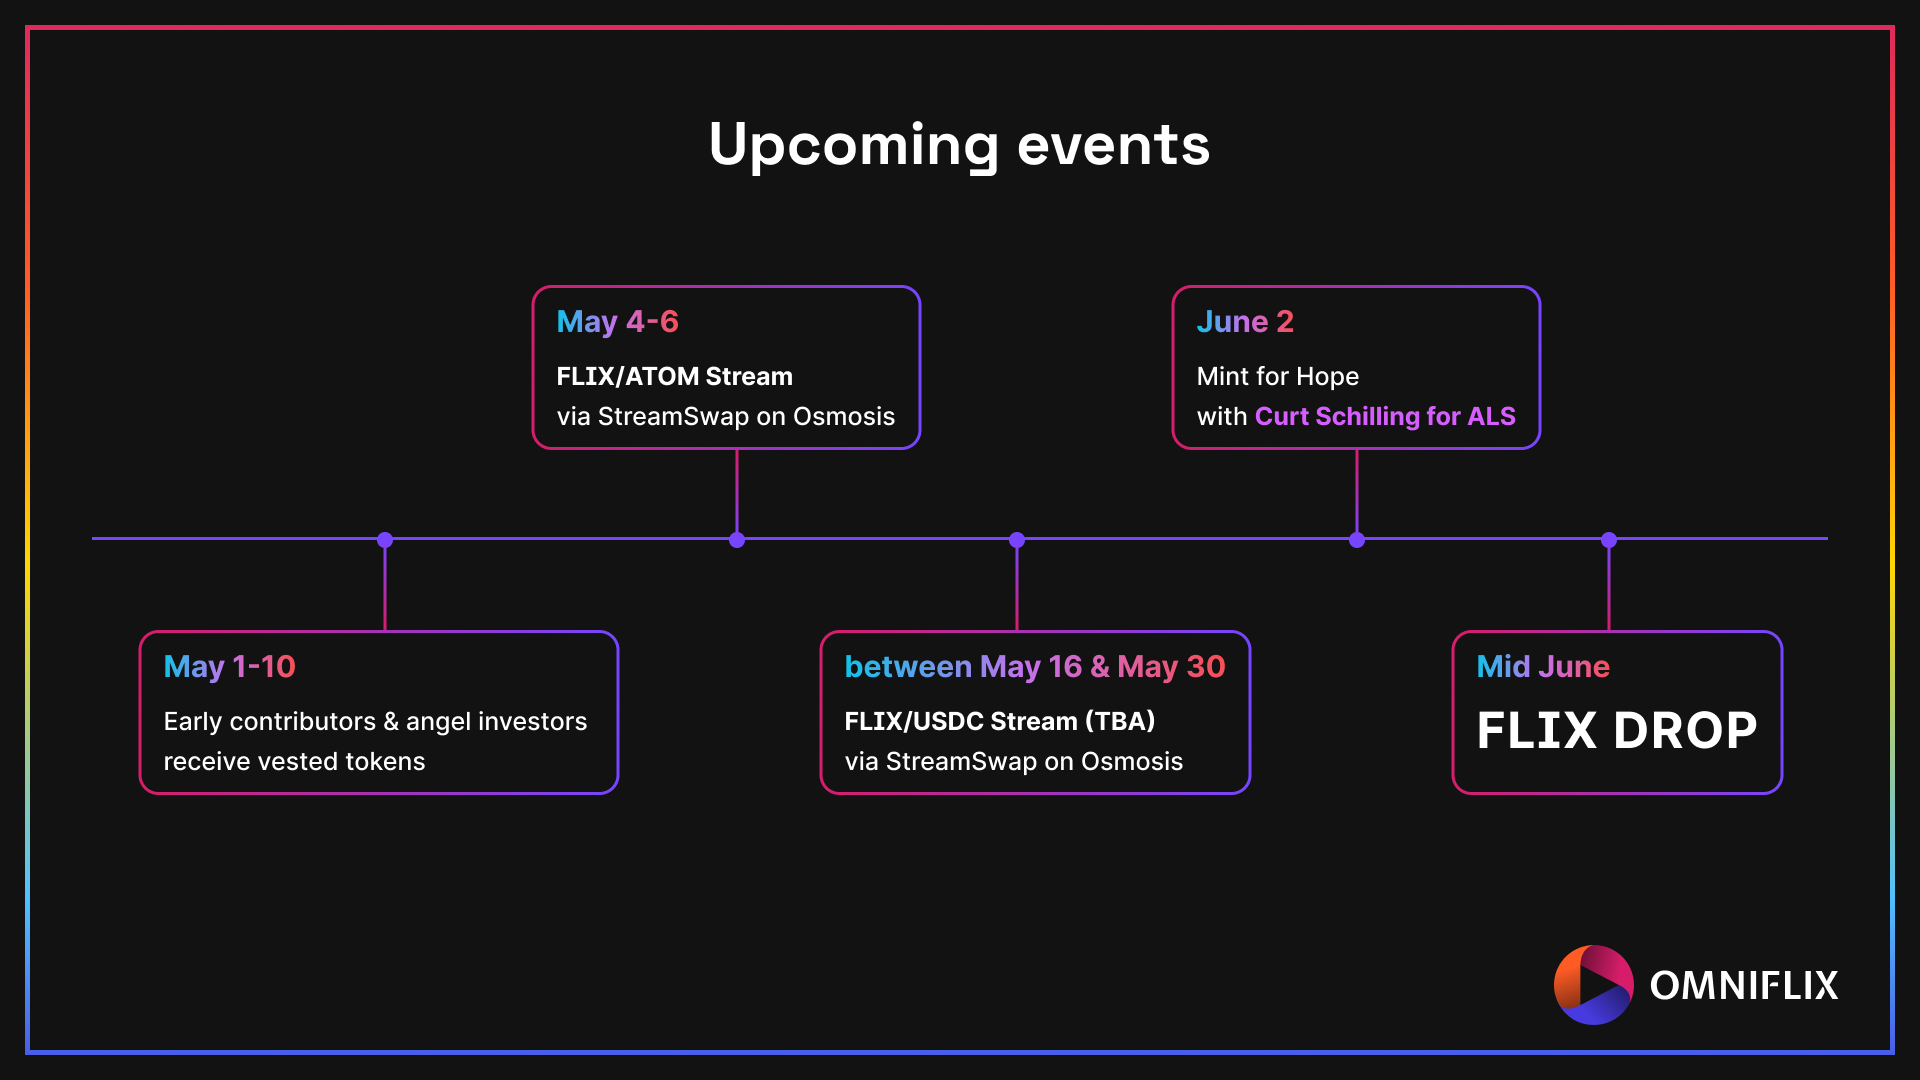 A timeline of upcoming events